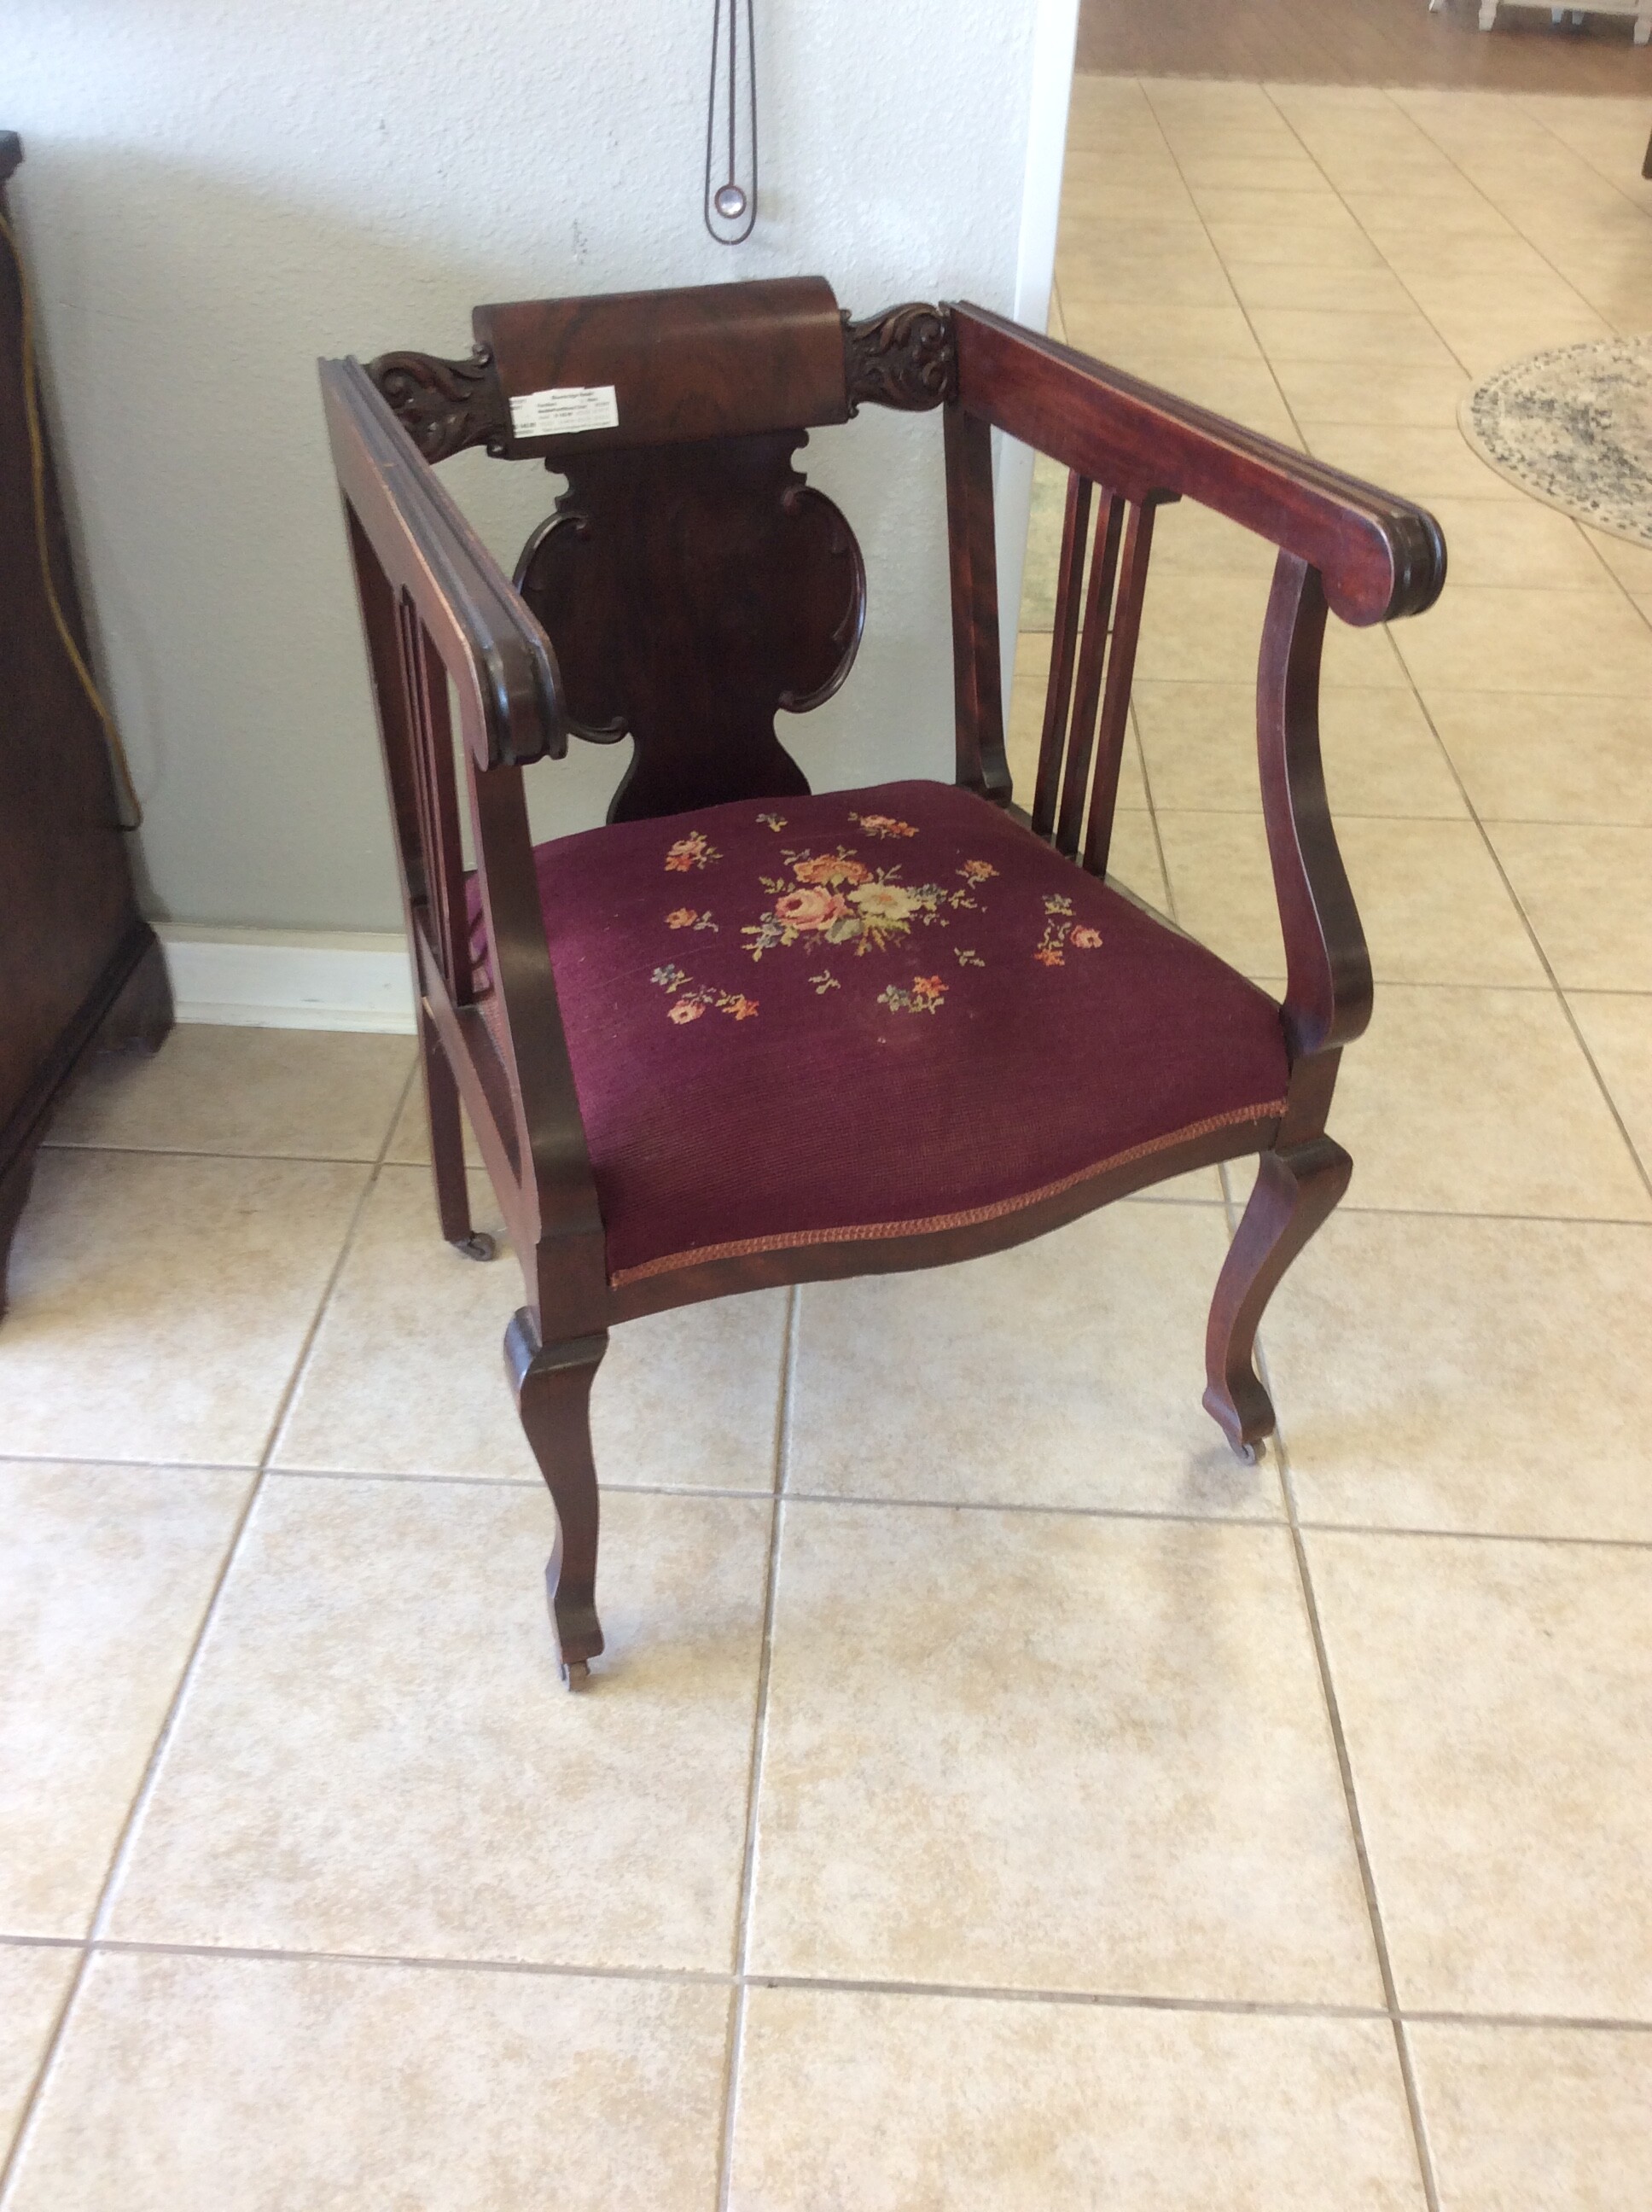 This is a beautiful antique neddle point wood chair. The seat is maroon and has yellow and red roses stitched onto it.